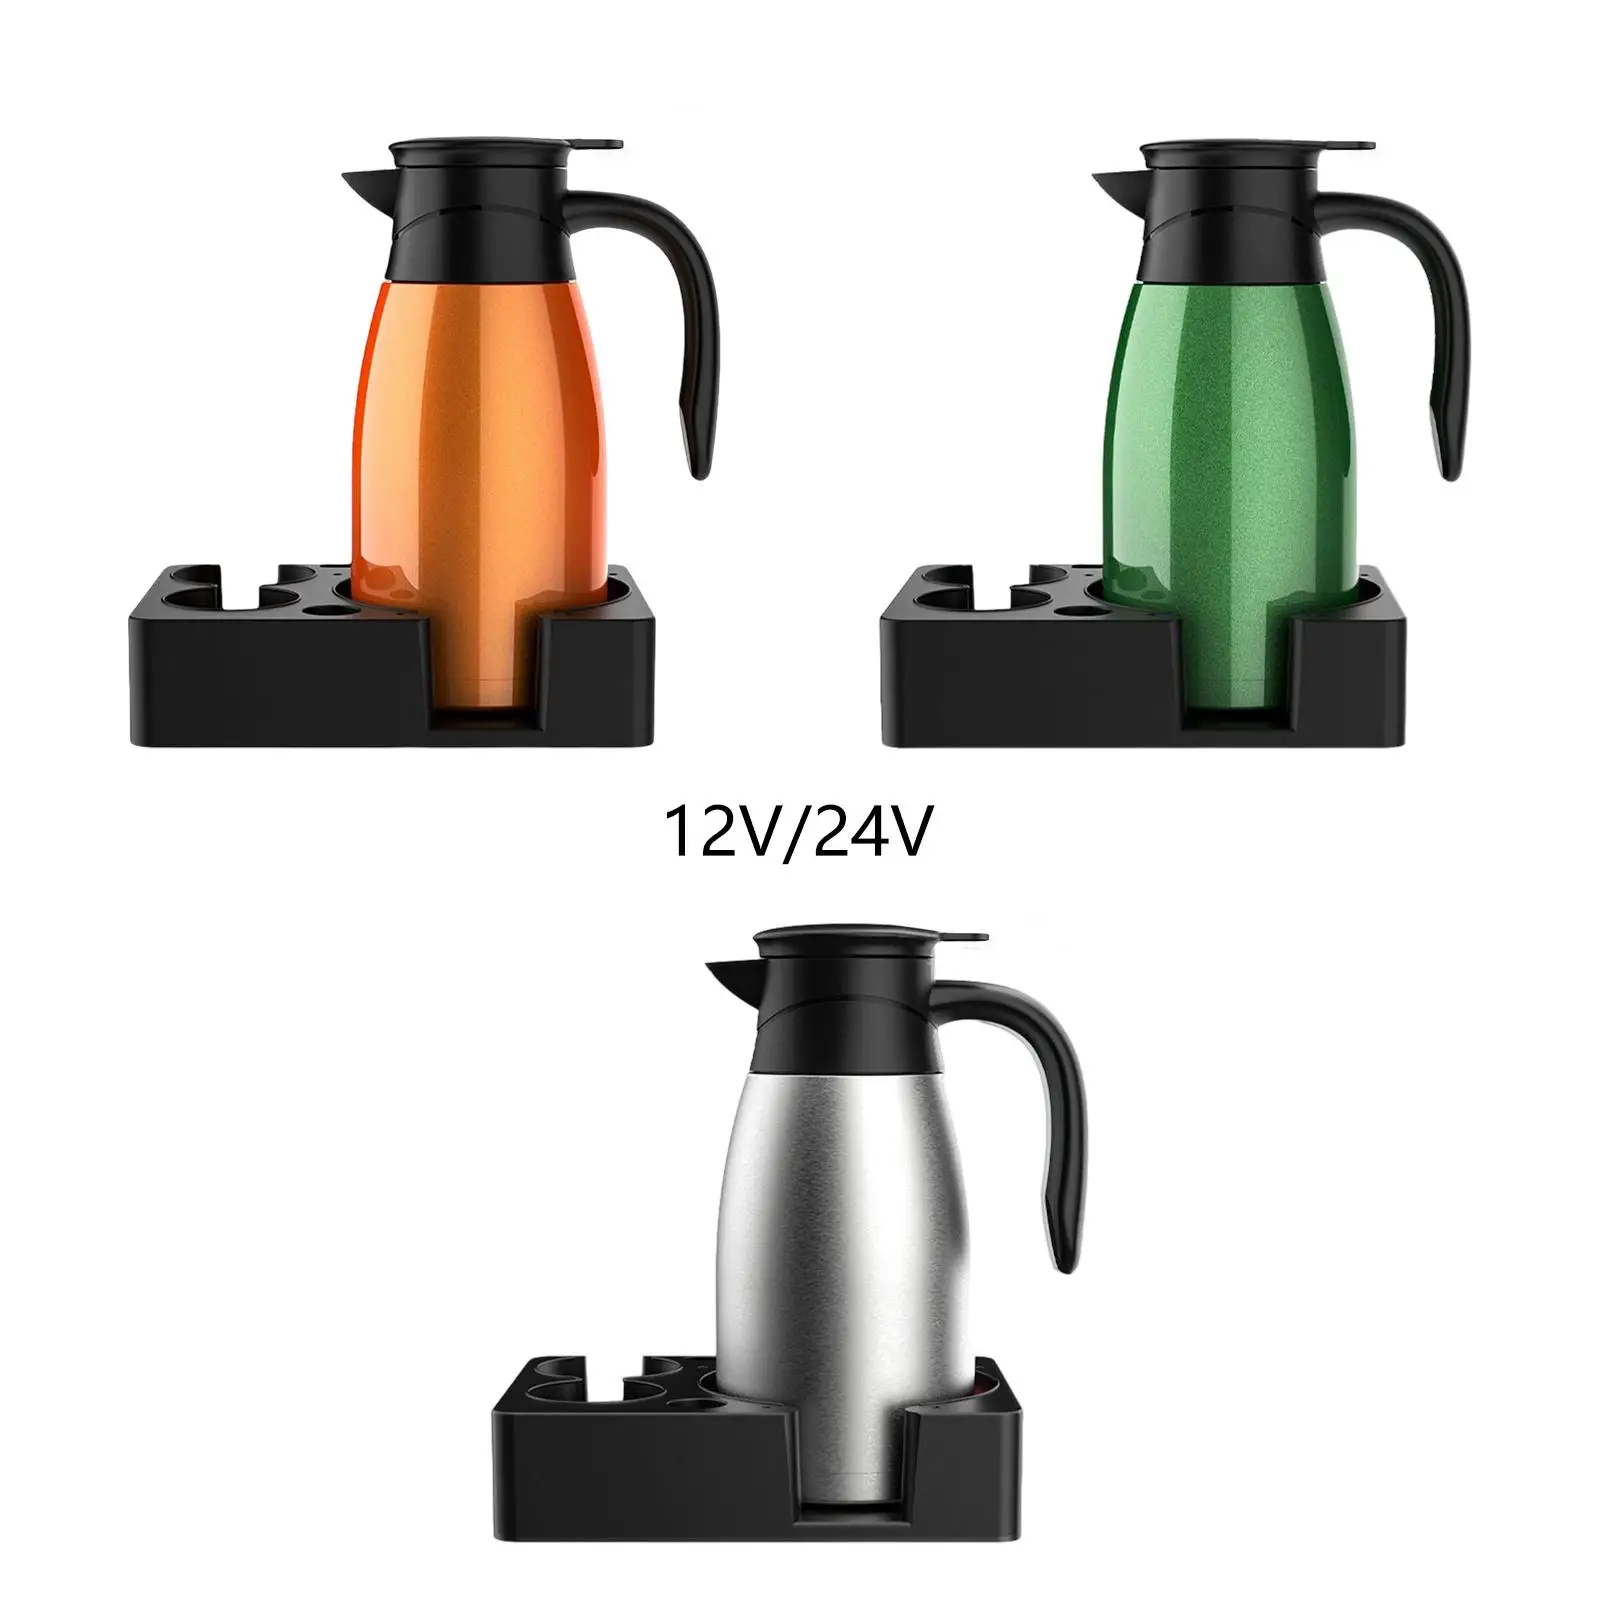 Electric Car Kettle Boiler Intelligent Heater Cup for Tea Water Outdoor Travel